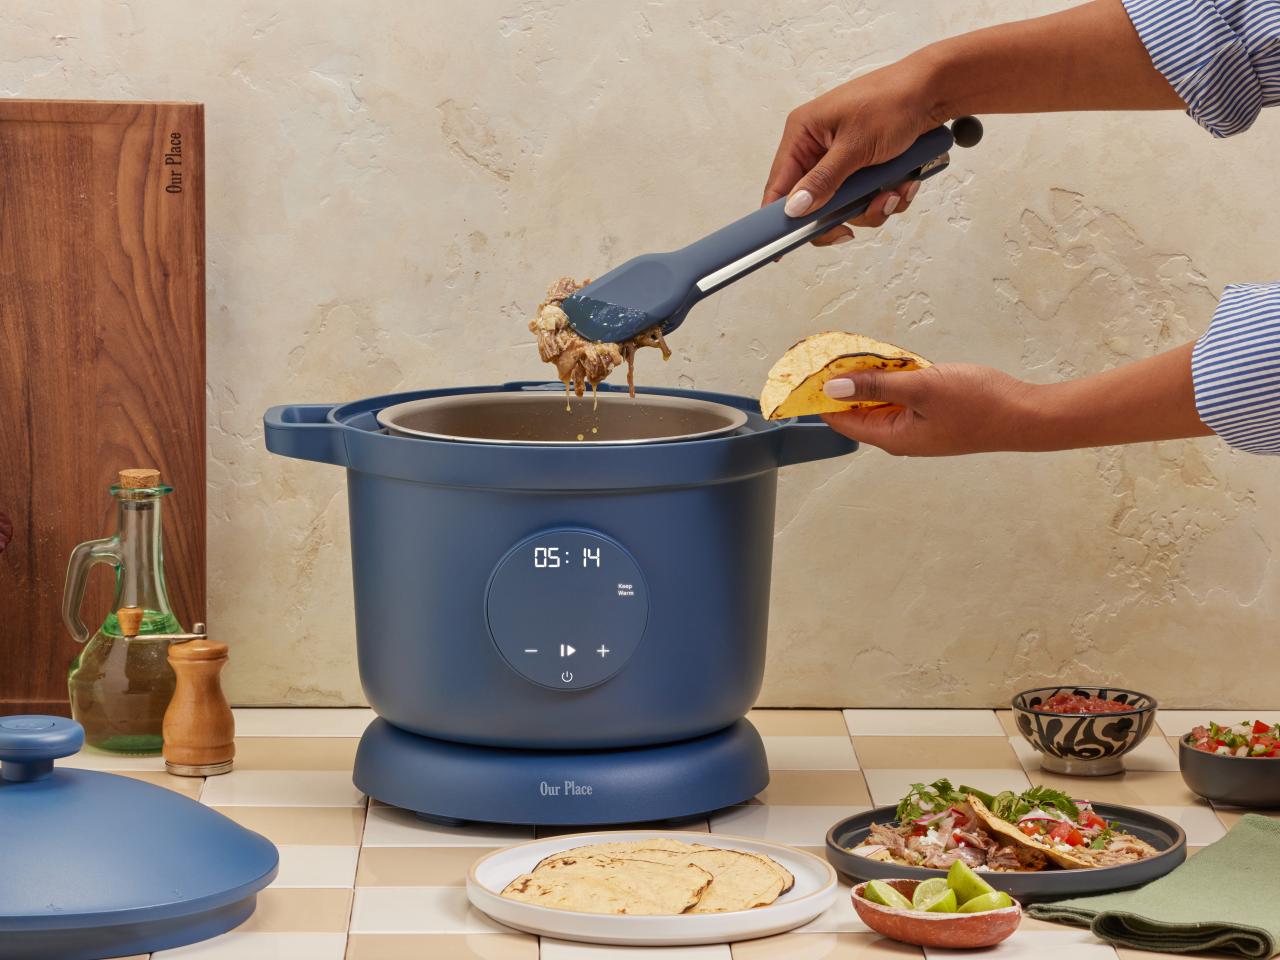 Pampered Chef Quick Cooker Review - Pressure Cooking Today™